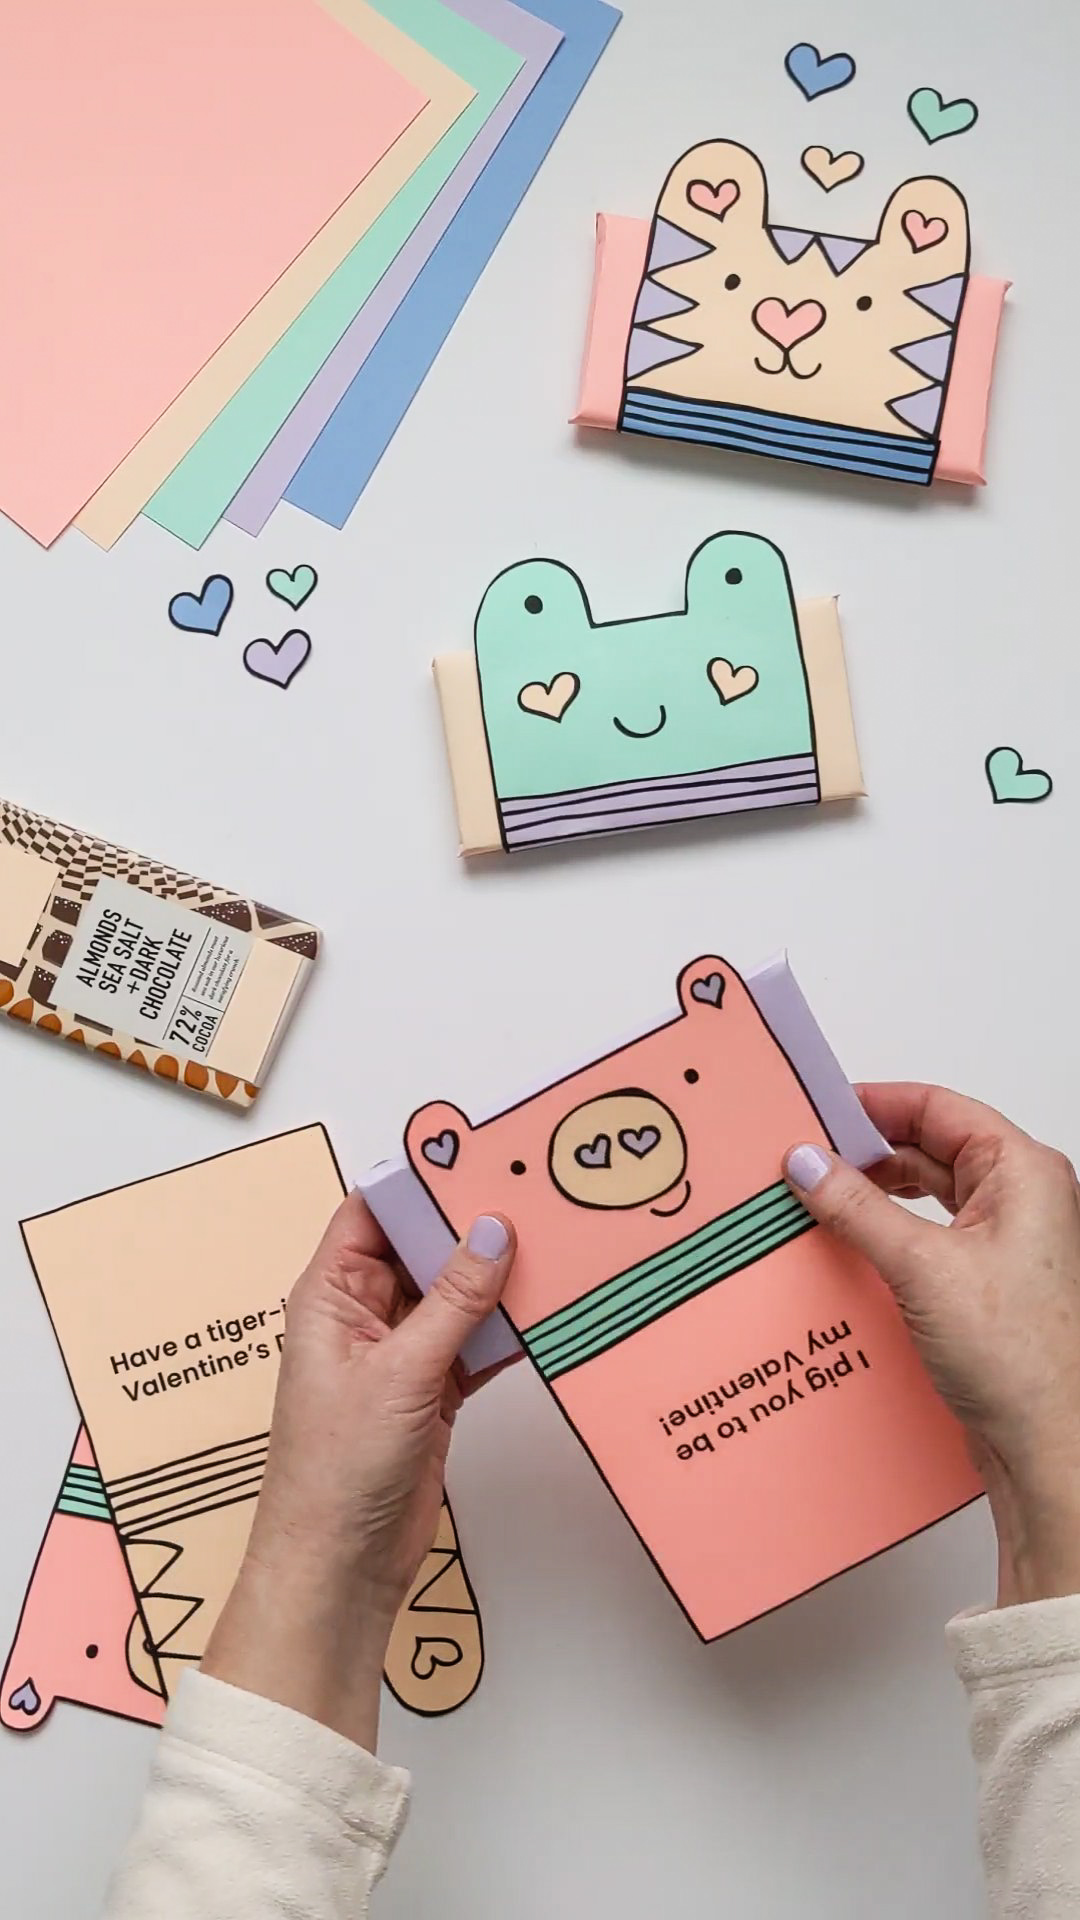 How to fold animal puns printable candy bar templates around full-size chocolate bars for Valentine's Day